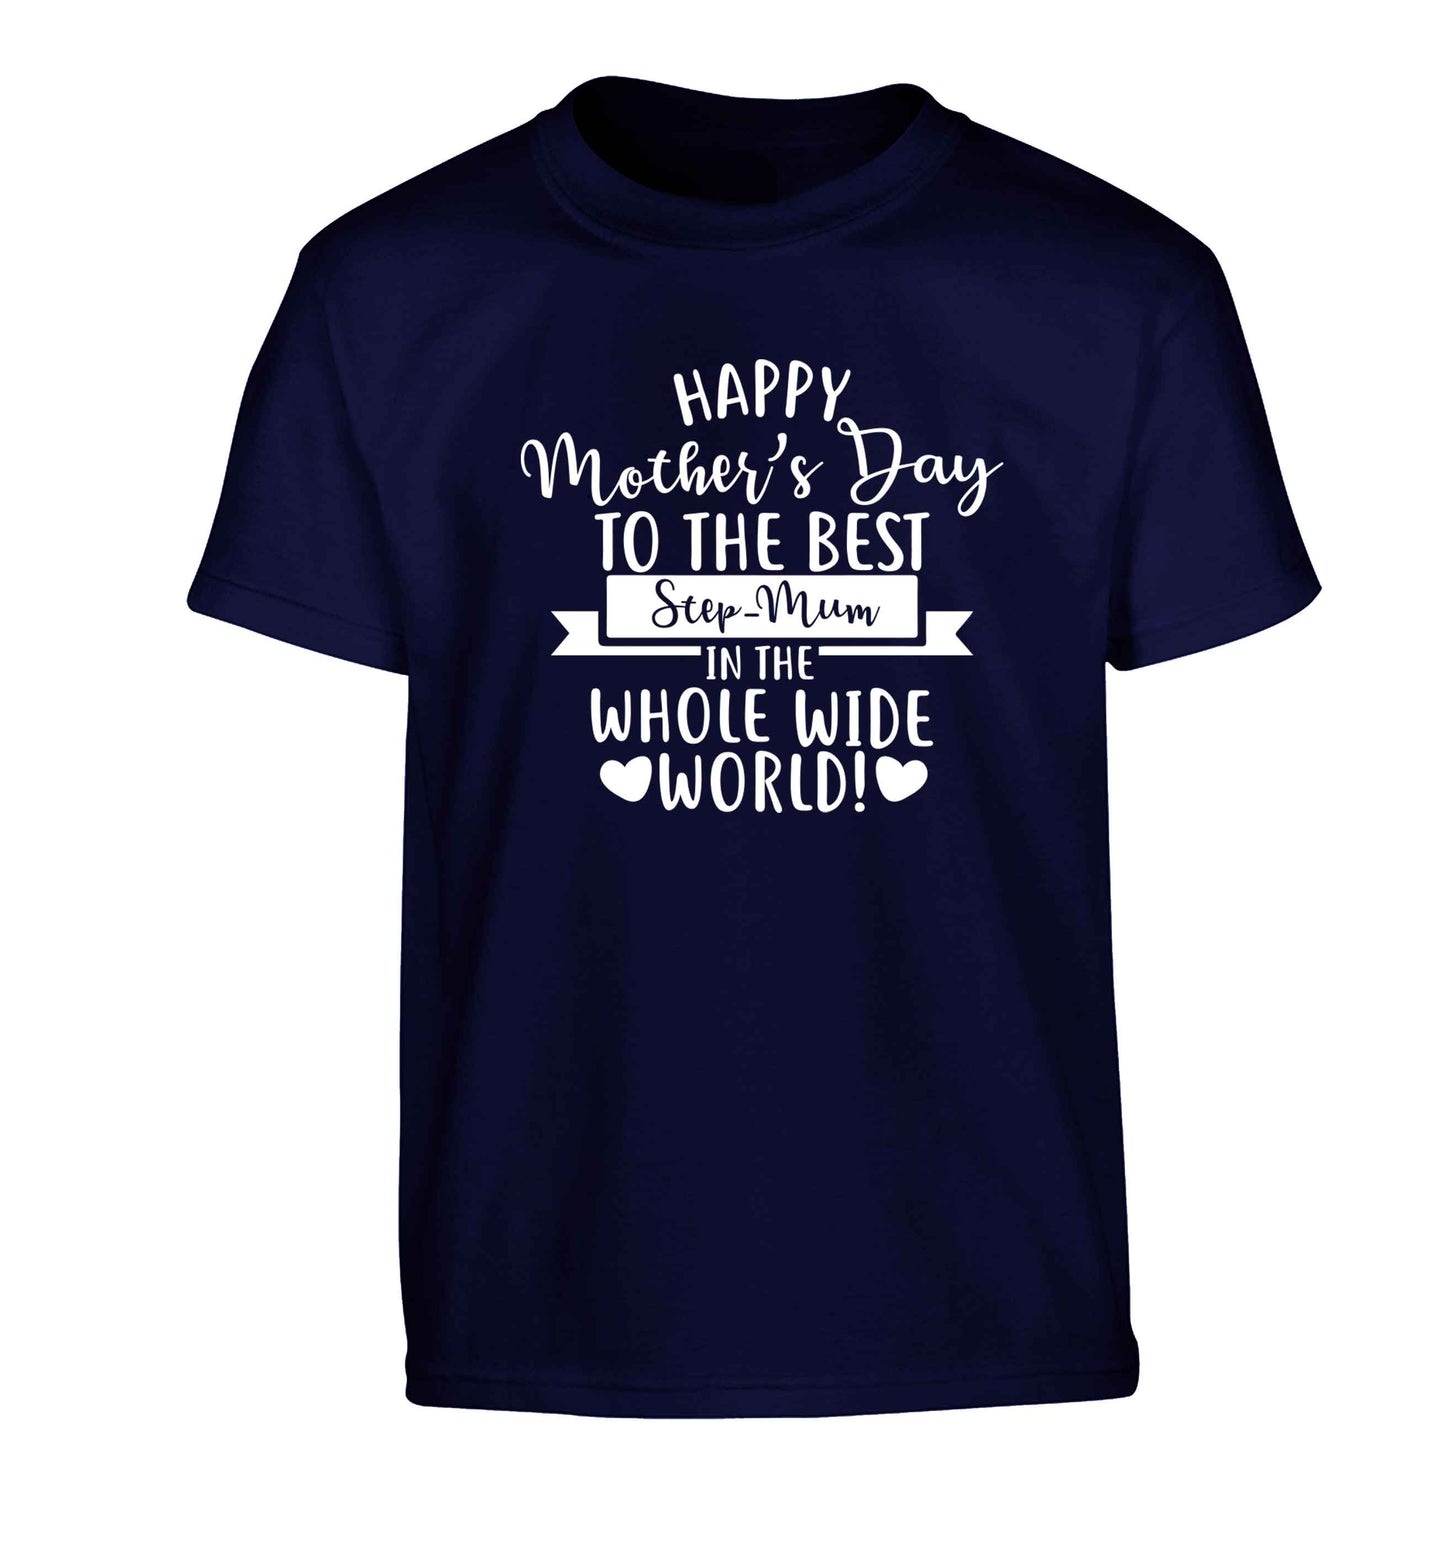 Happy mother's day to the best step-mum in the world Children's navy Tshirt 12-13 Years